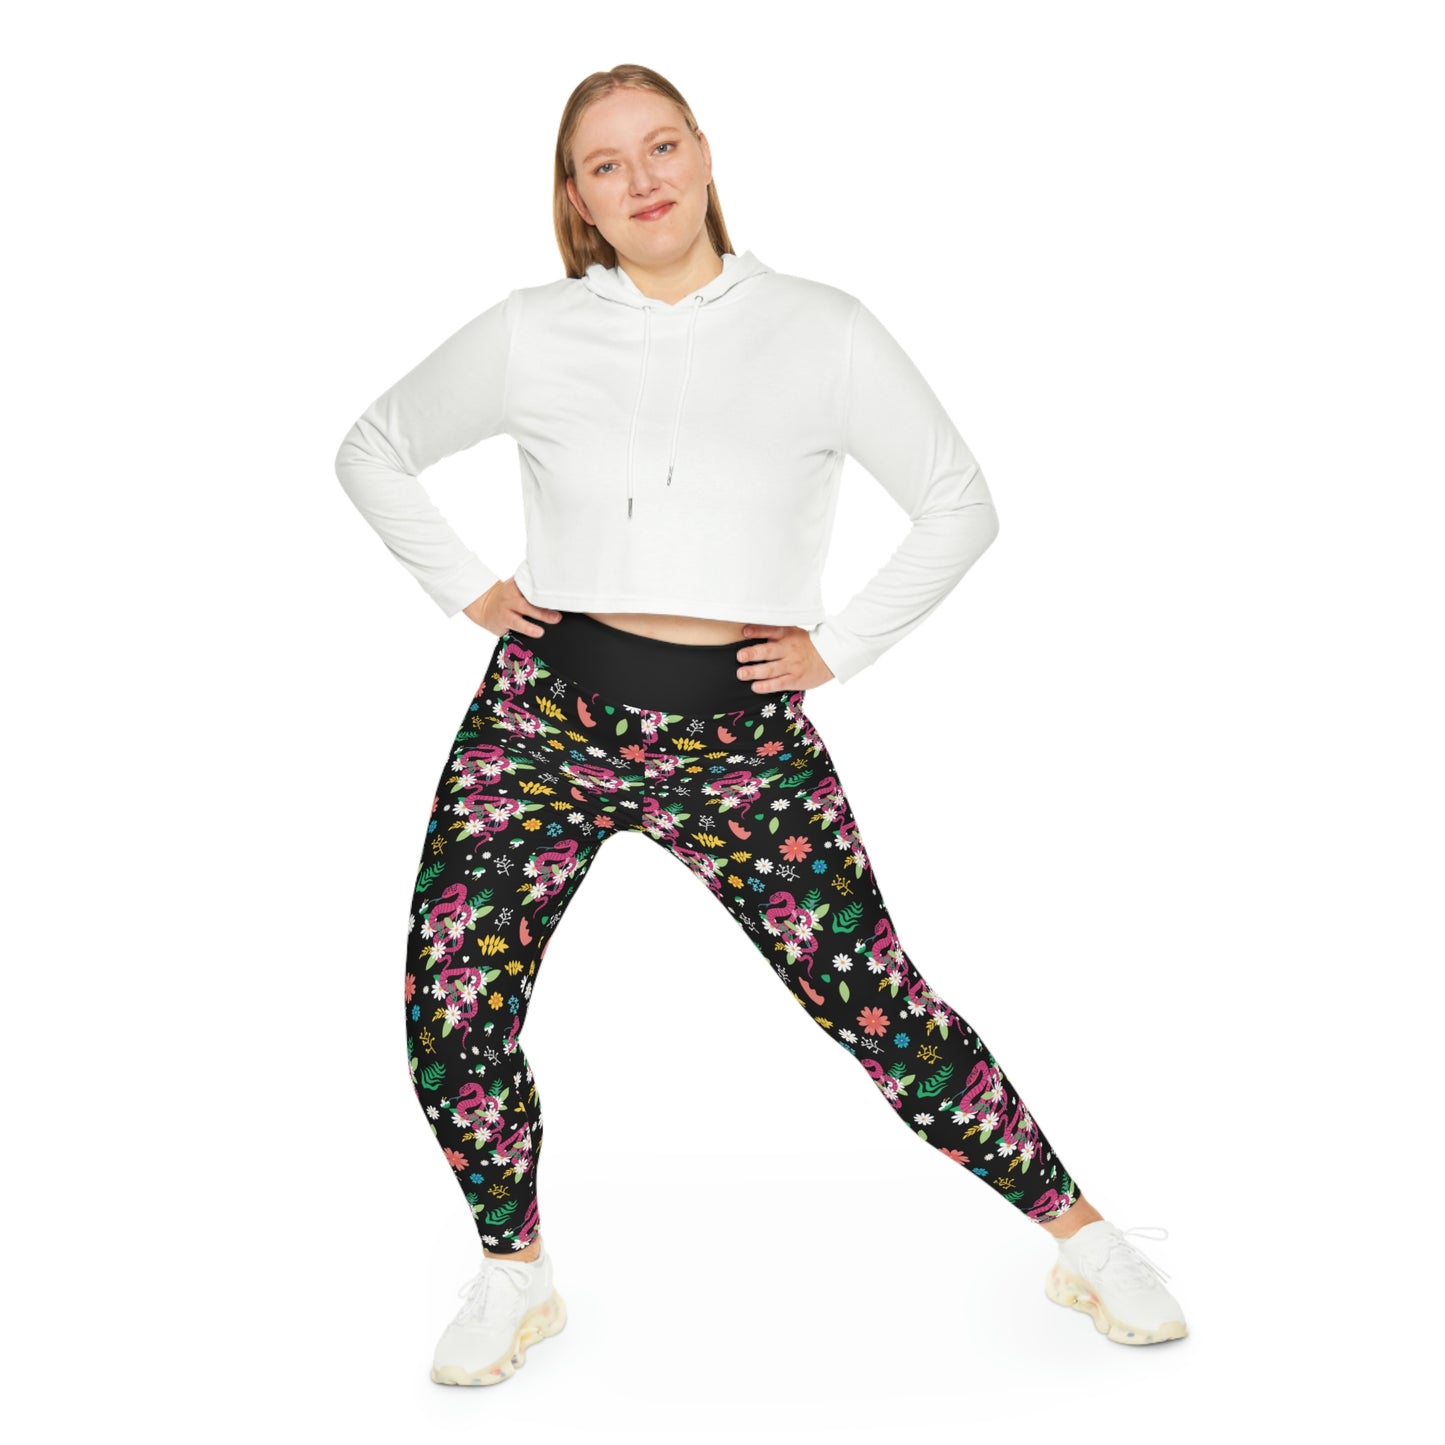 Snake Floral Plus Size Leggings One of a Kind Gift - Unique Workout Activewear tights for Mom fitness, Mothers Day, Girlfriend Christmas Gift